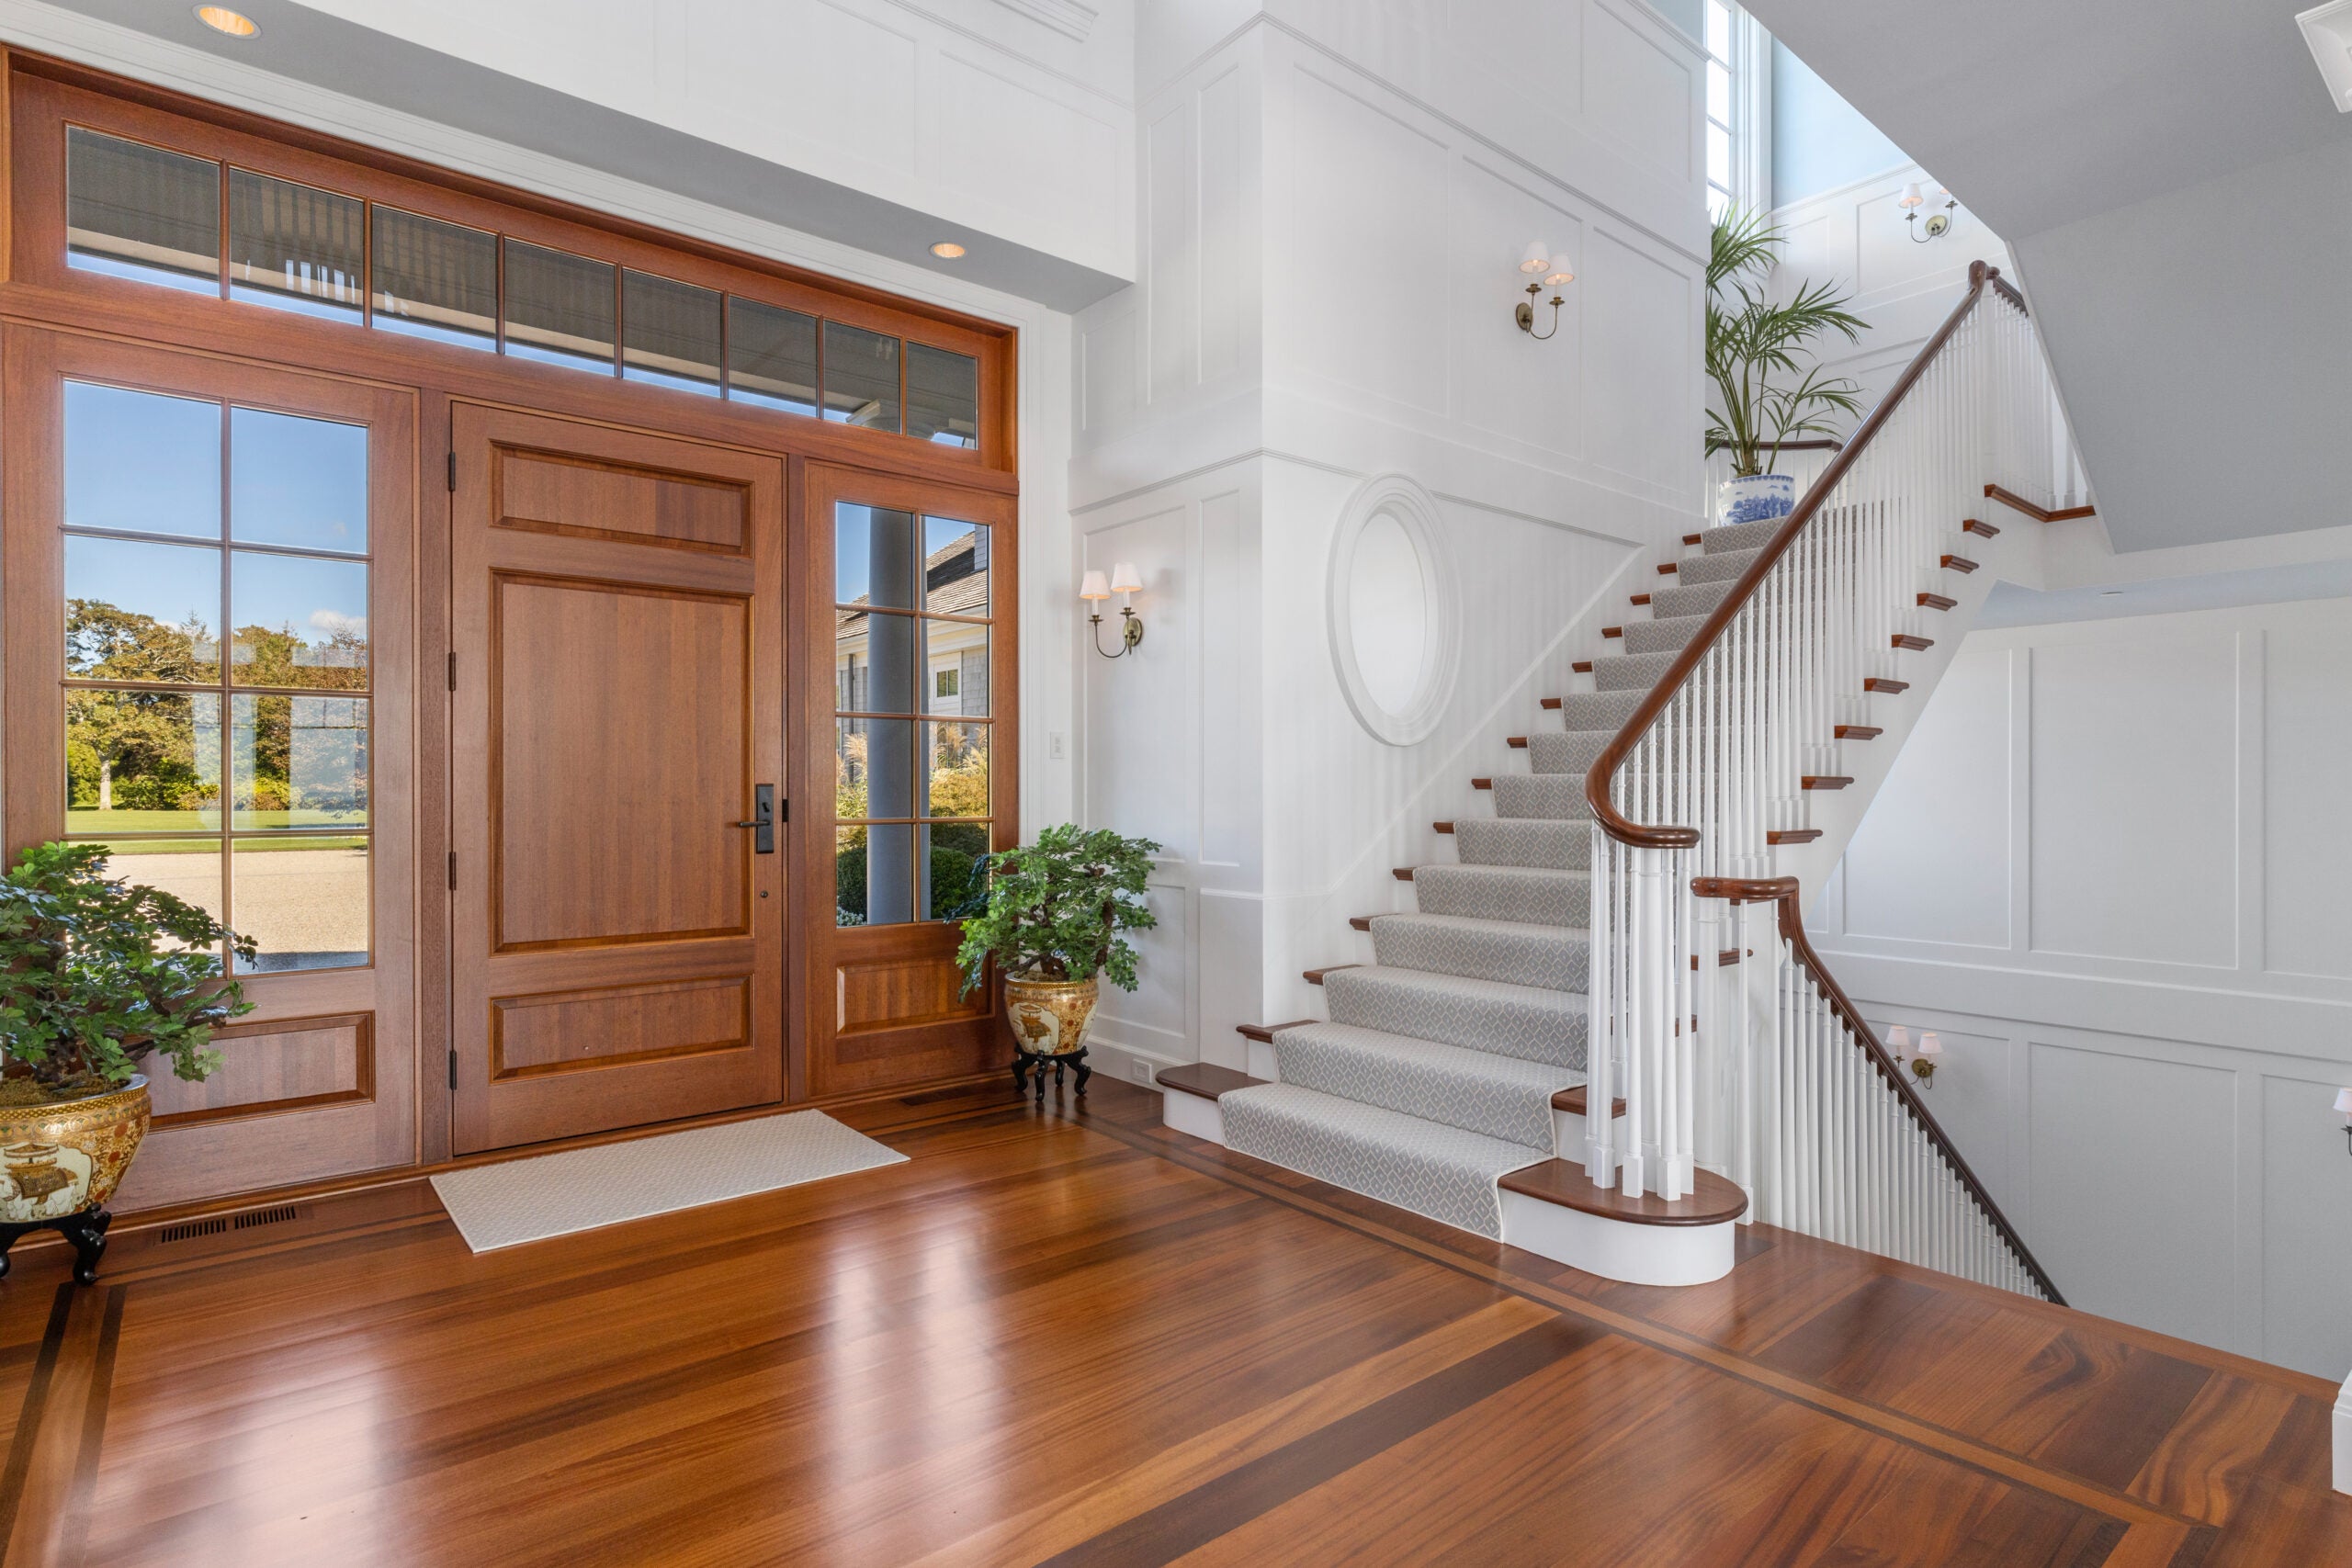 A view of a foyer with a wooden door with wide sidelights, board-and-batten wainscoting, wood stairs with a gray runner, sconces, and a hardwood floor with an inlay.